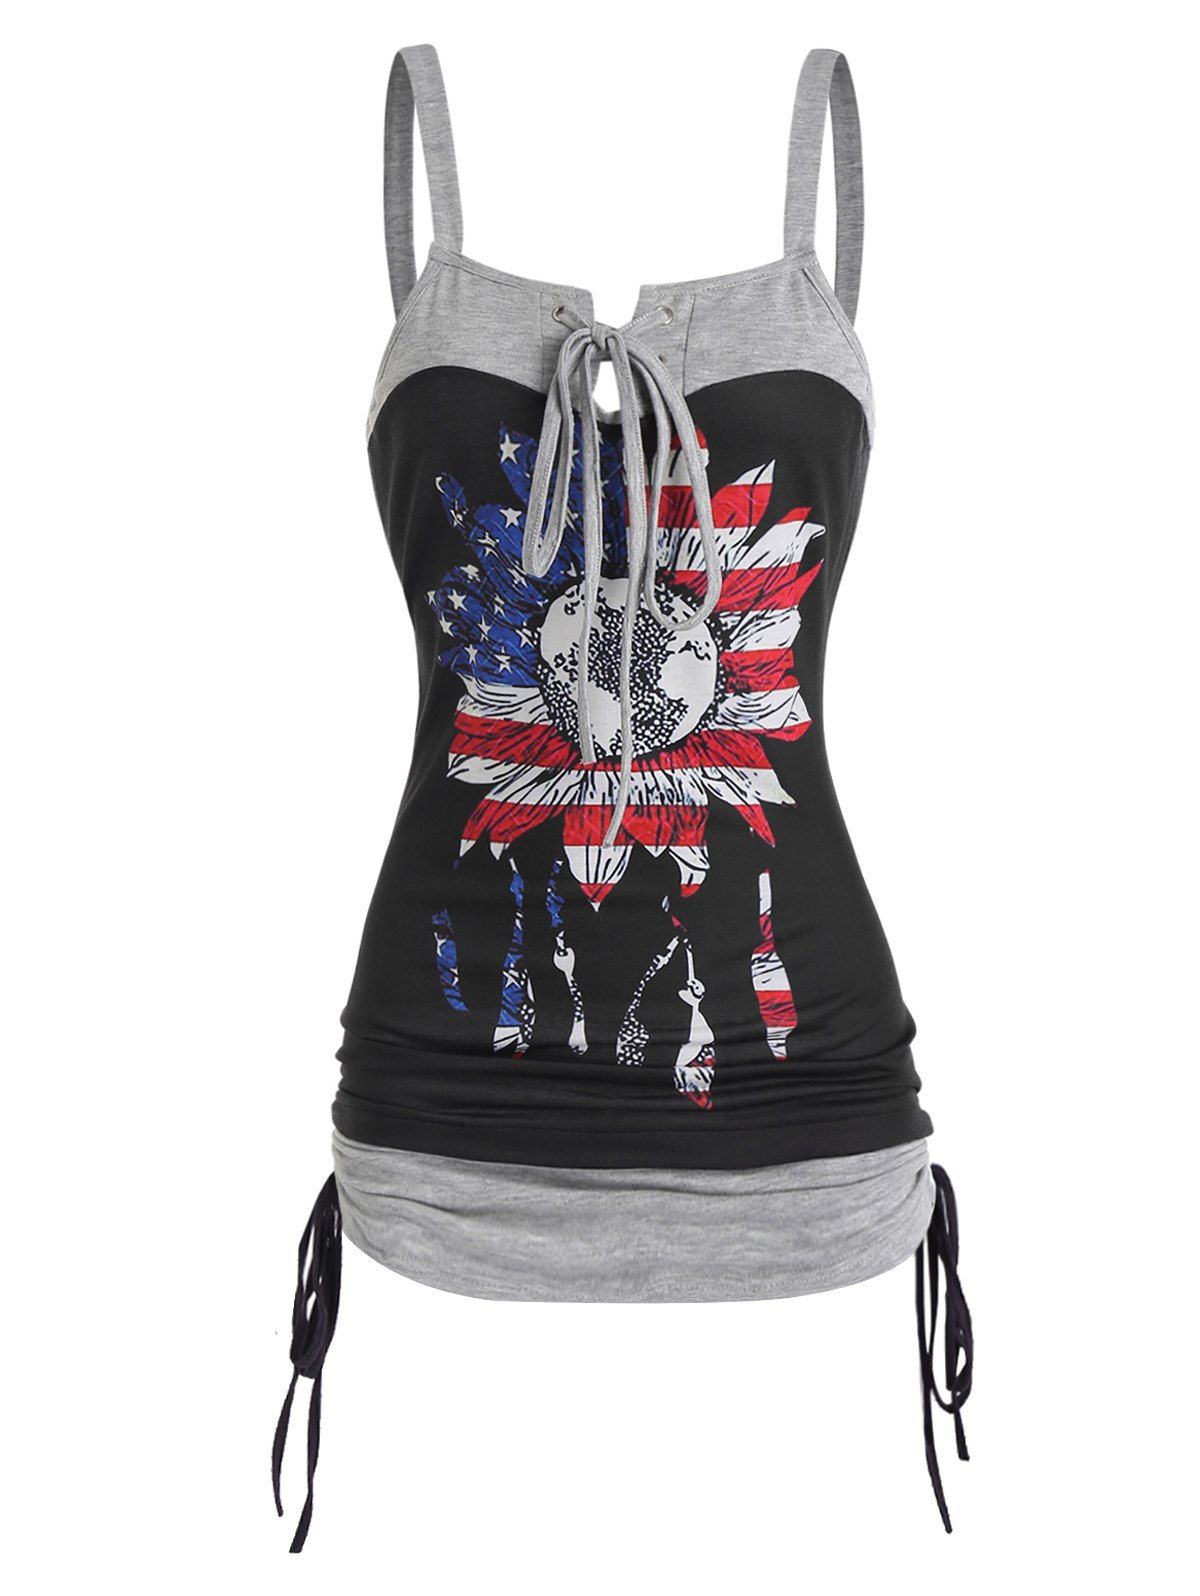 Floral Print Casual Tank Top Contrast Colorblock Lace Up Cinched American Flag Summer Top - BLACK XXL